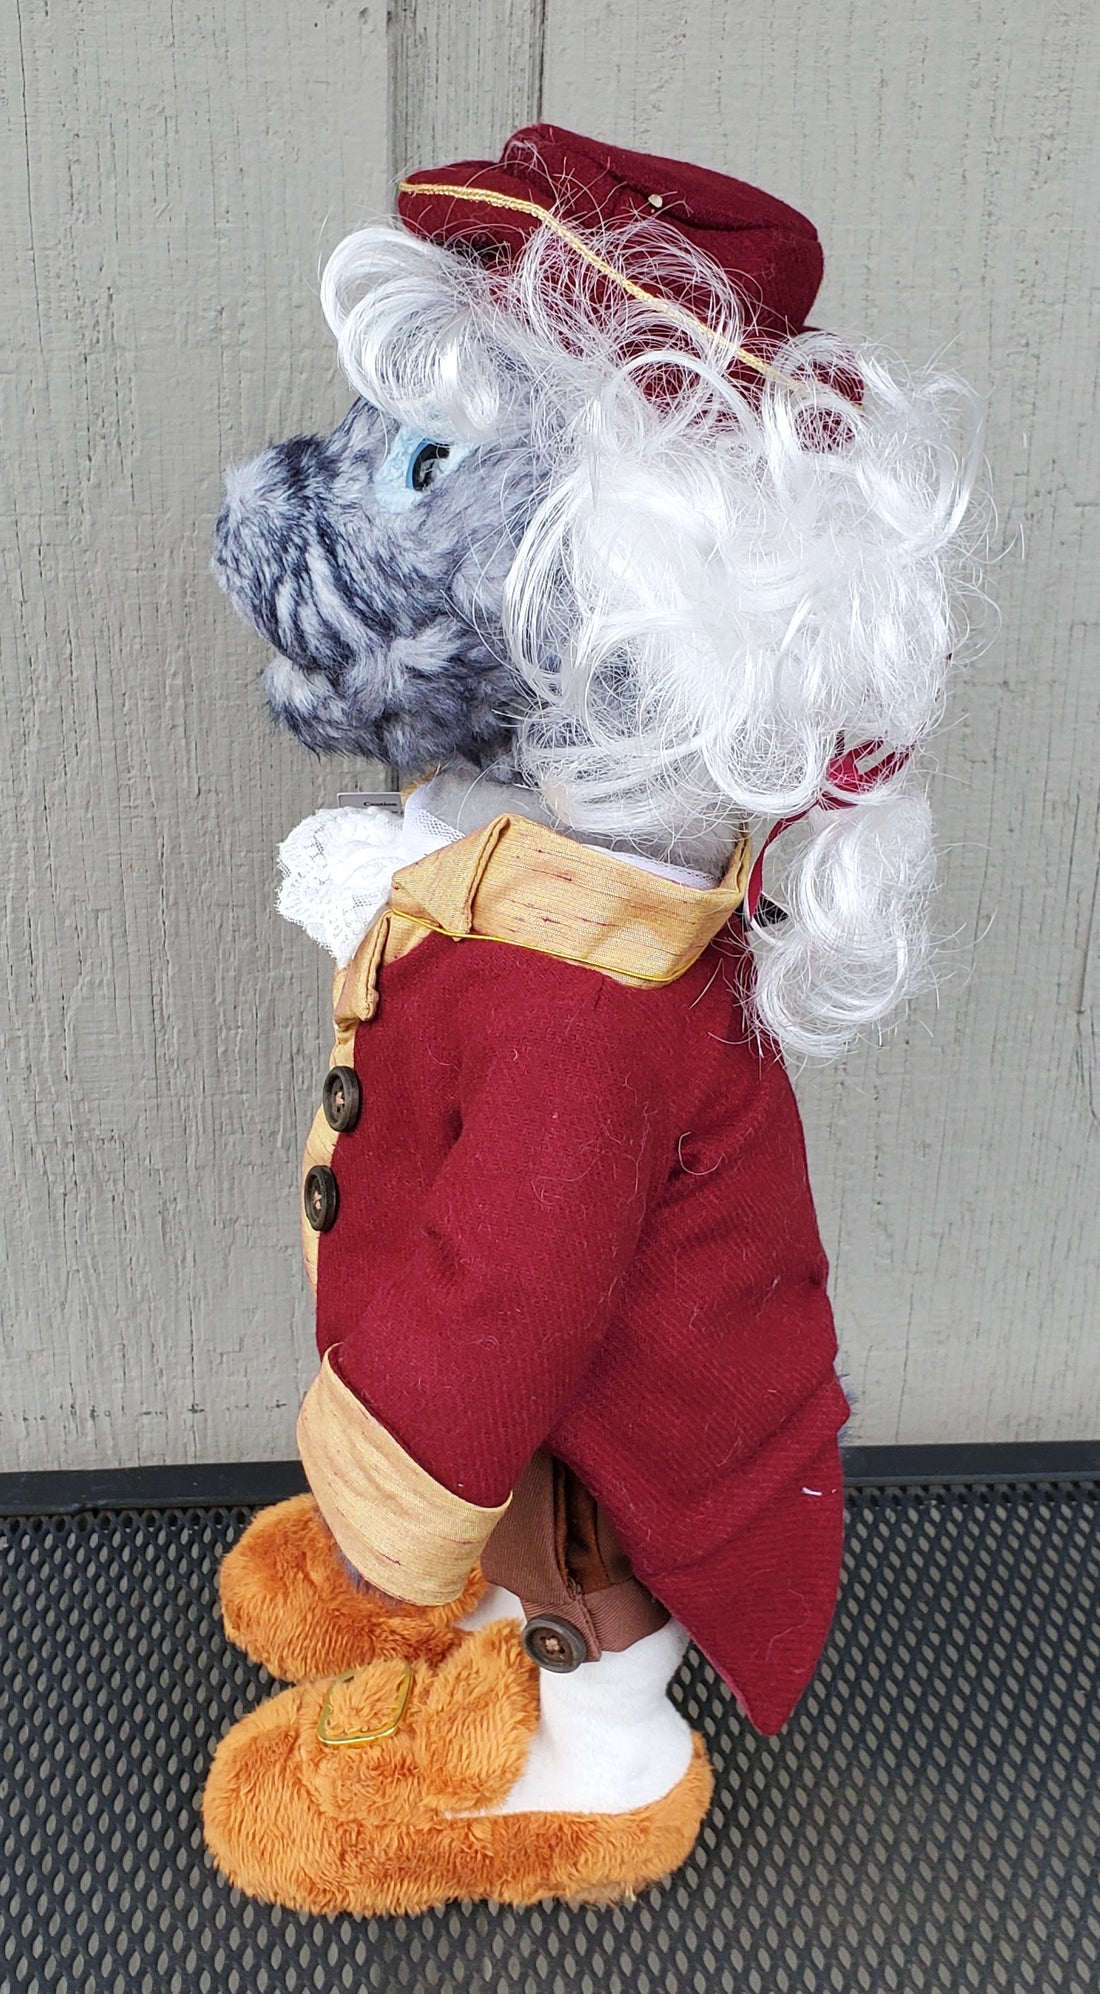 Fish Footman - 15" Aluce in Wonderland Character from Charlie Bears